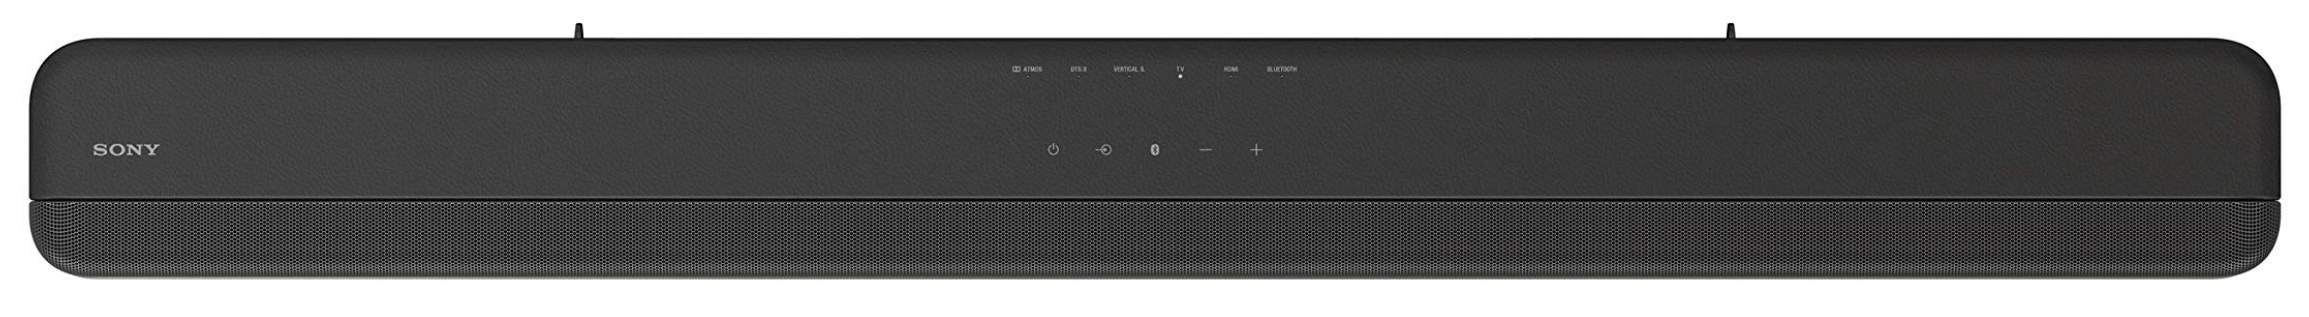 Sony HTX8500 2.1ch Dolby Atmos/DTS:X Soundbar with Built-in subwoofer $198.00 + FS (Only for Prime members)